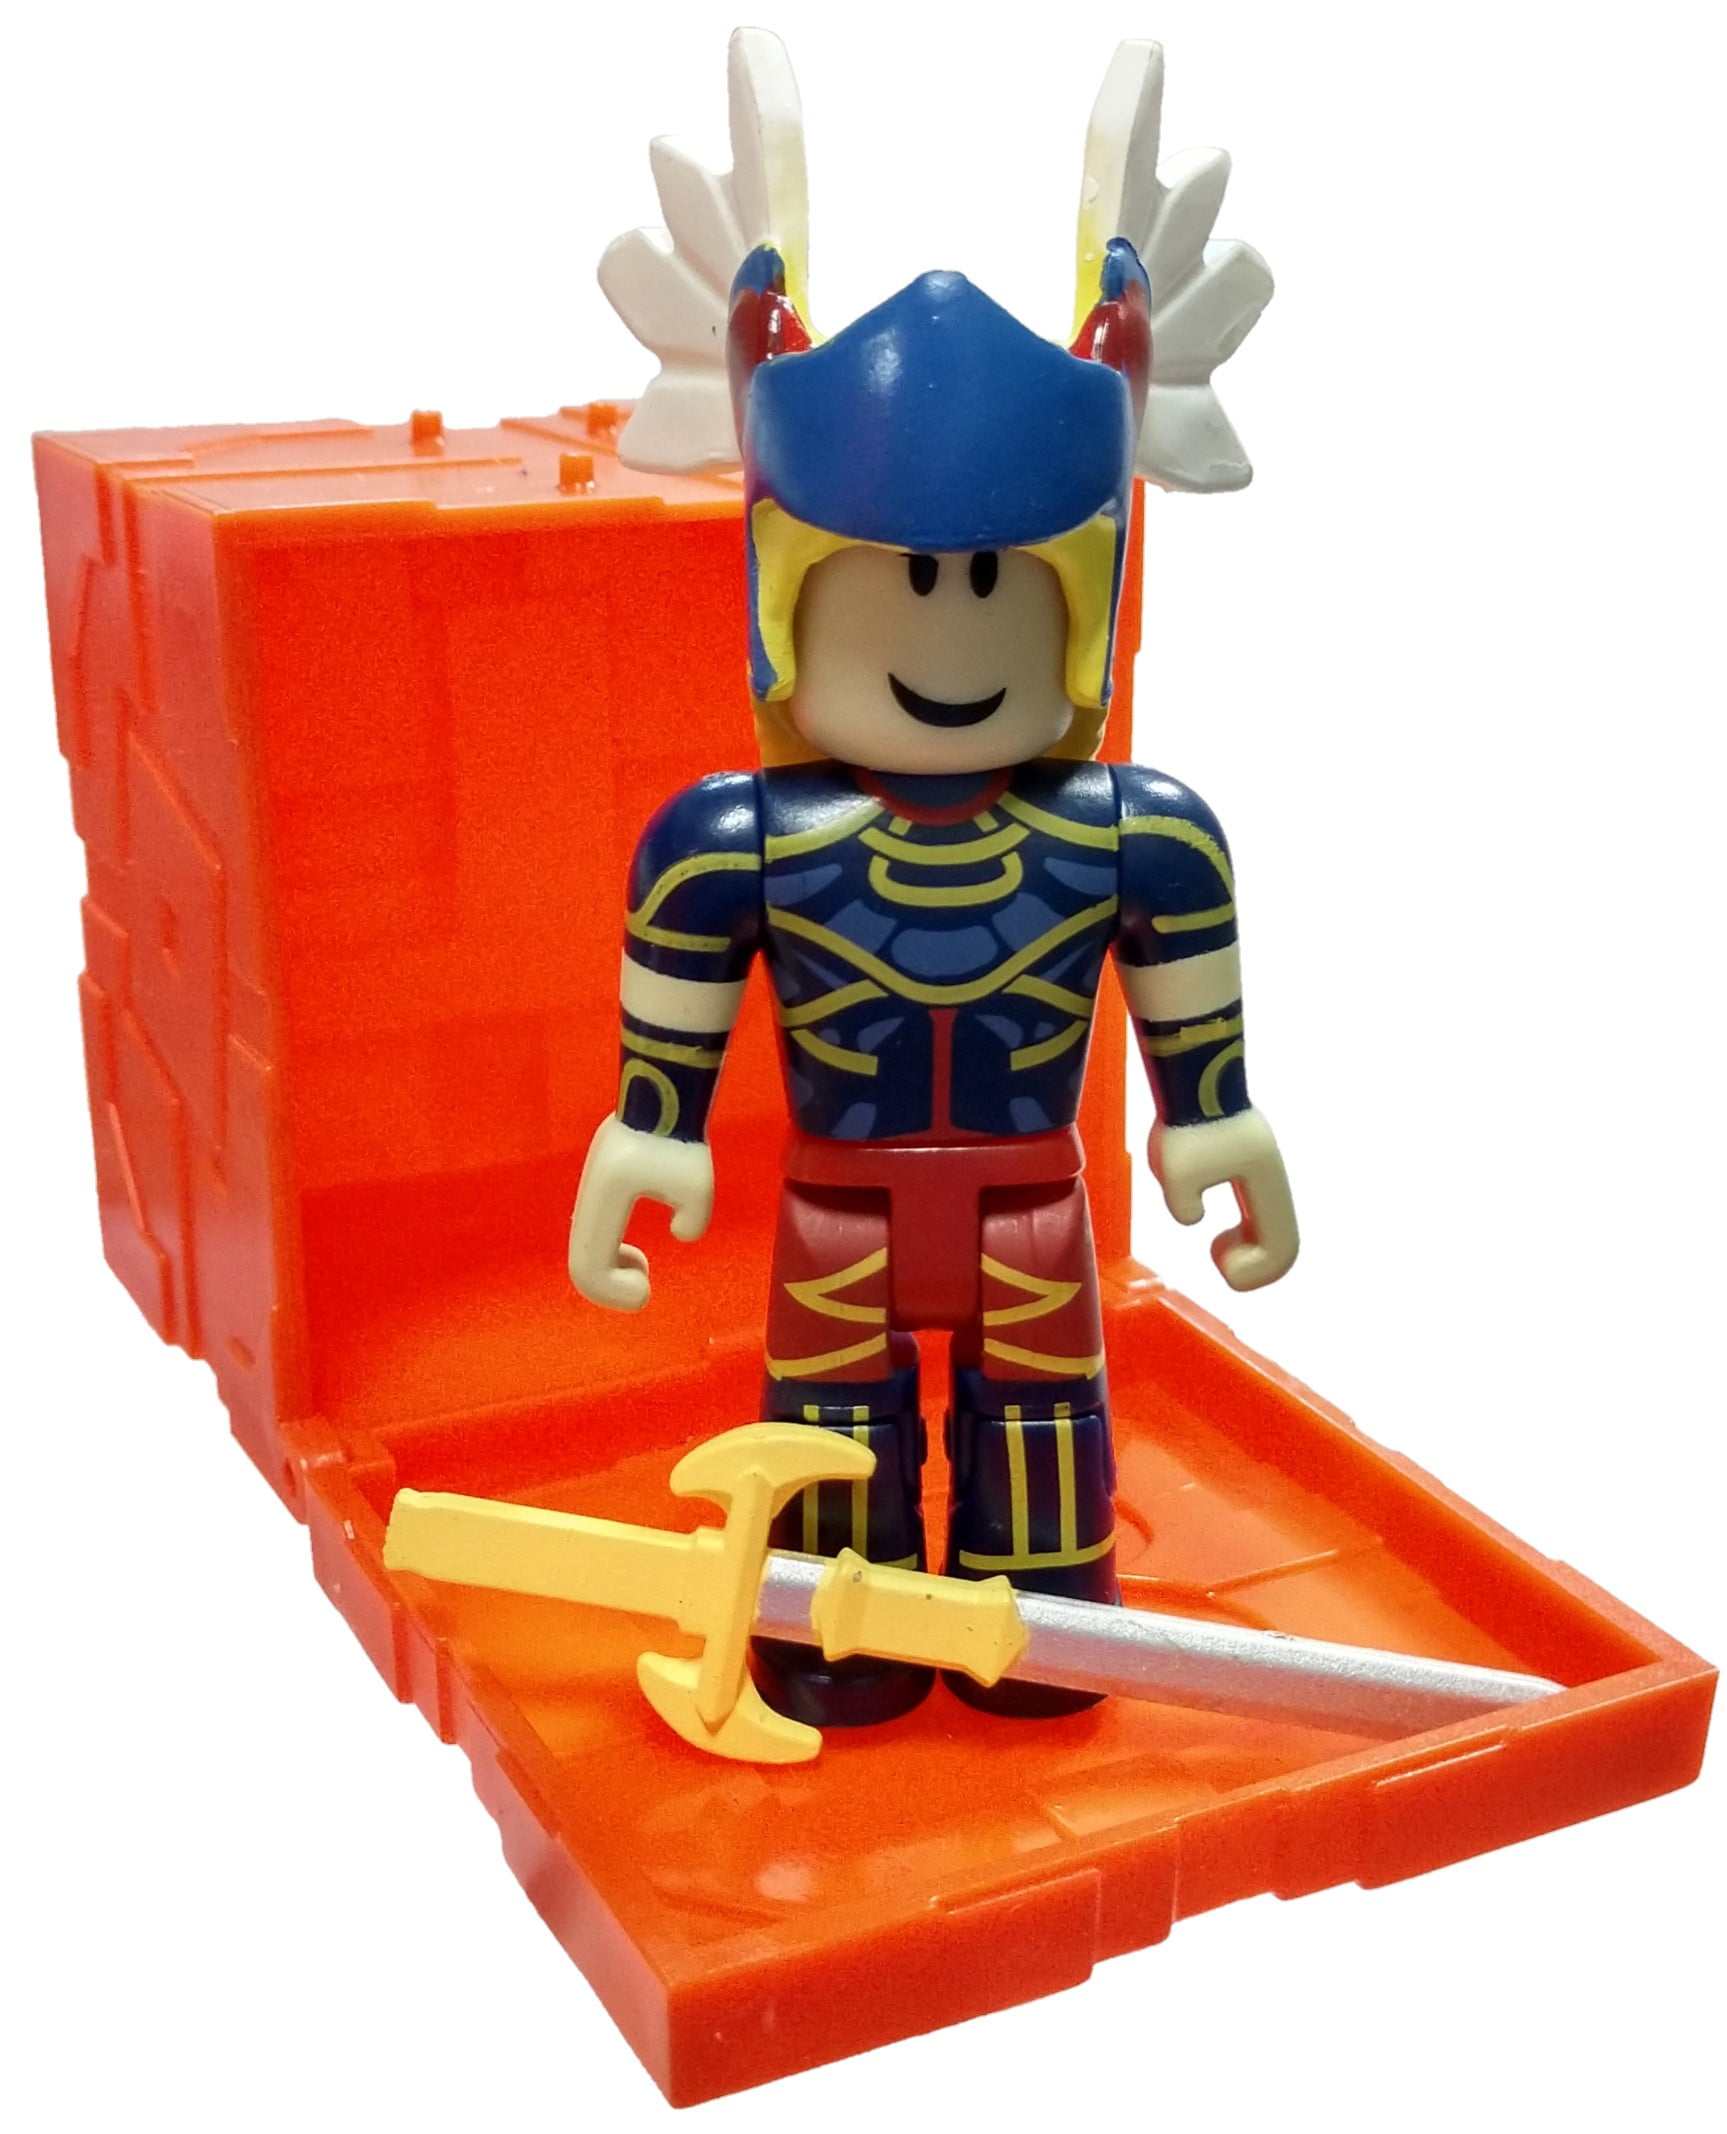 Roblox Series 6 Summoner Tycoon Valkyrie Mini Figure With Orange Cube And Online Code No Packaging Walmart Com Walmart Com - roblox red valkyrie toy